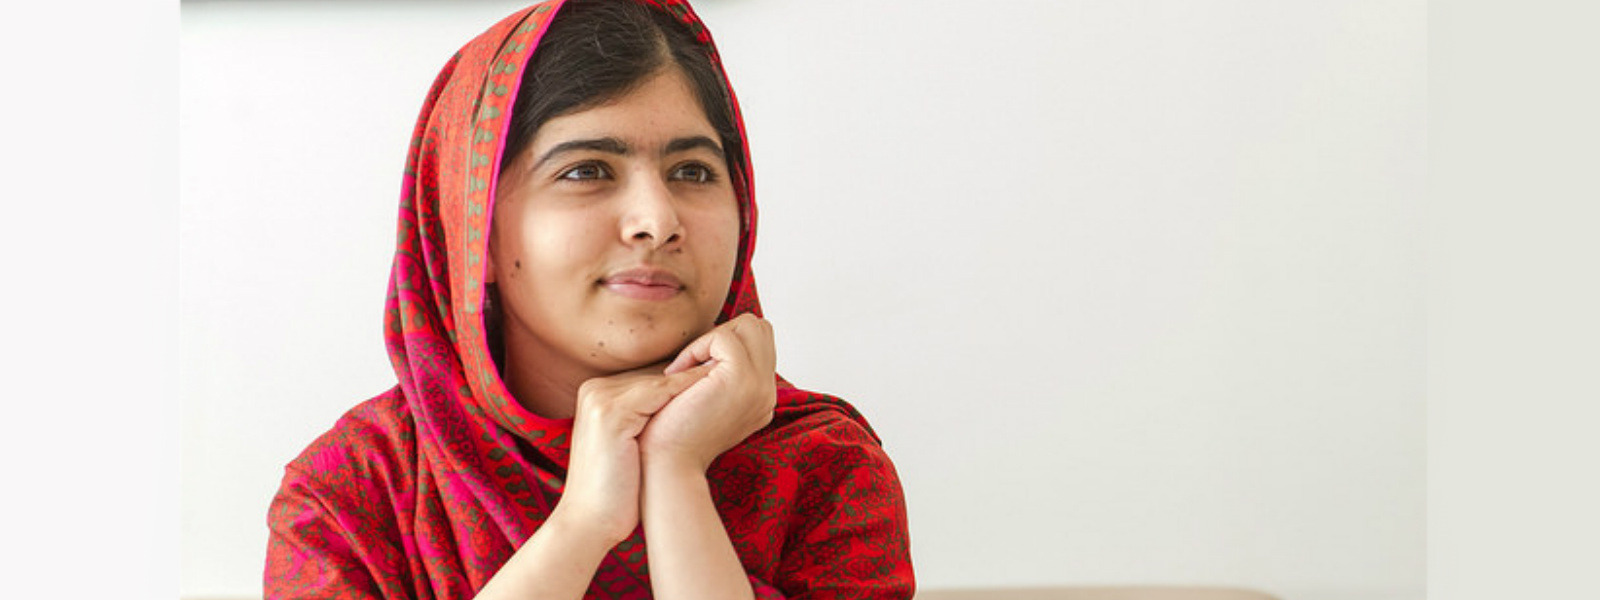 Malala visits home for first time since being shot